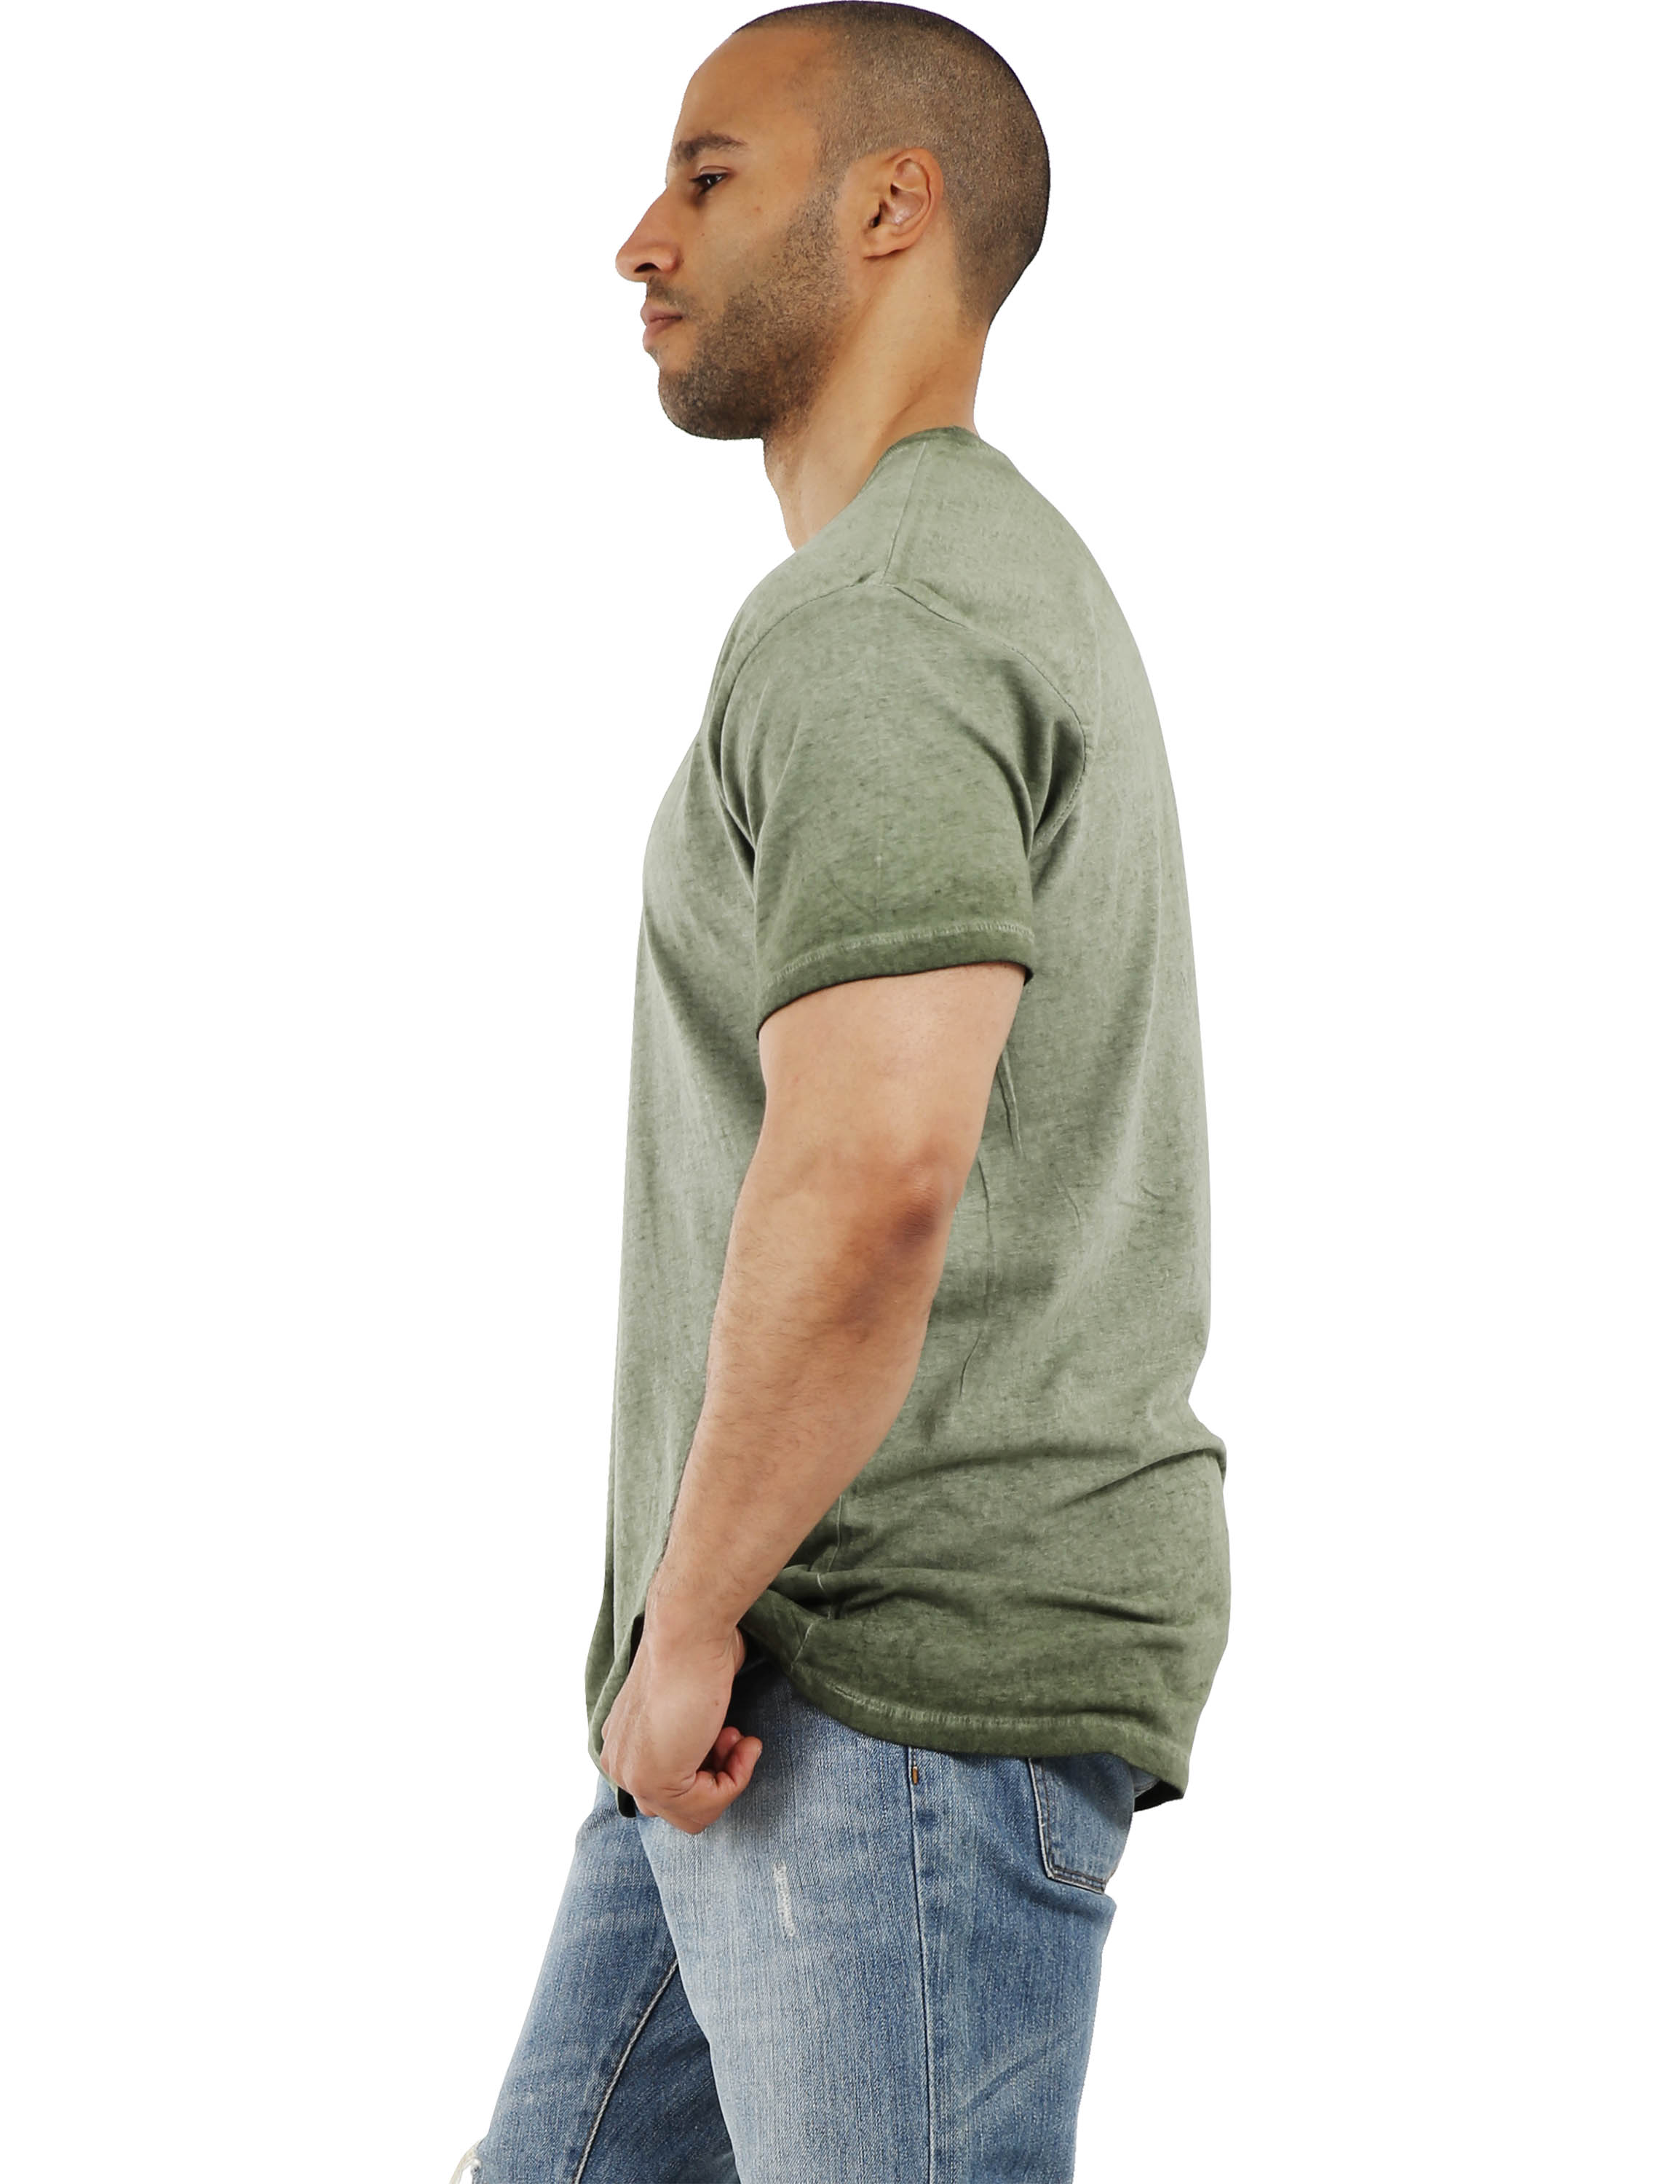 Ma Croix Mens Oil Wash Short Sleeve T Shirts Soft Faded Vintage Casual Crewneck Tee - image 2 of 5